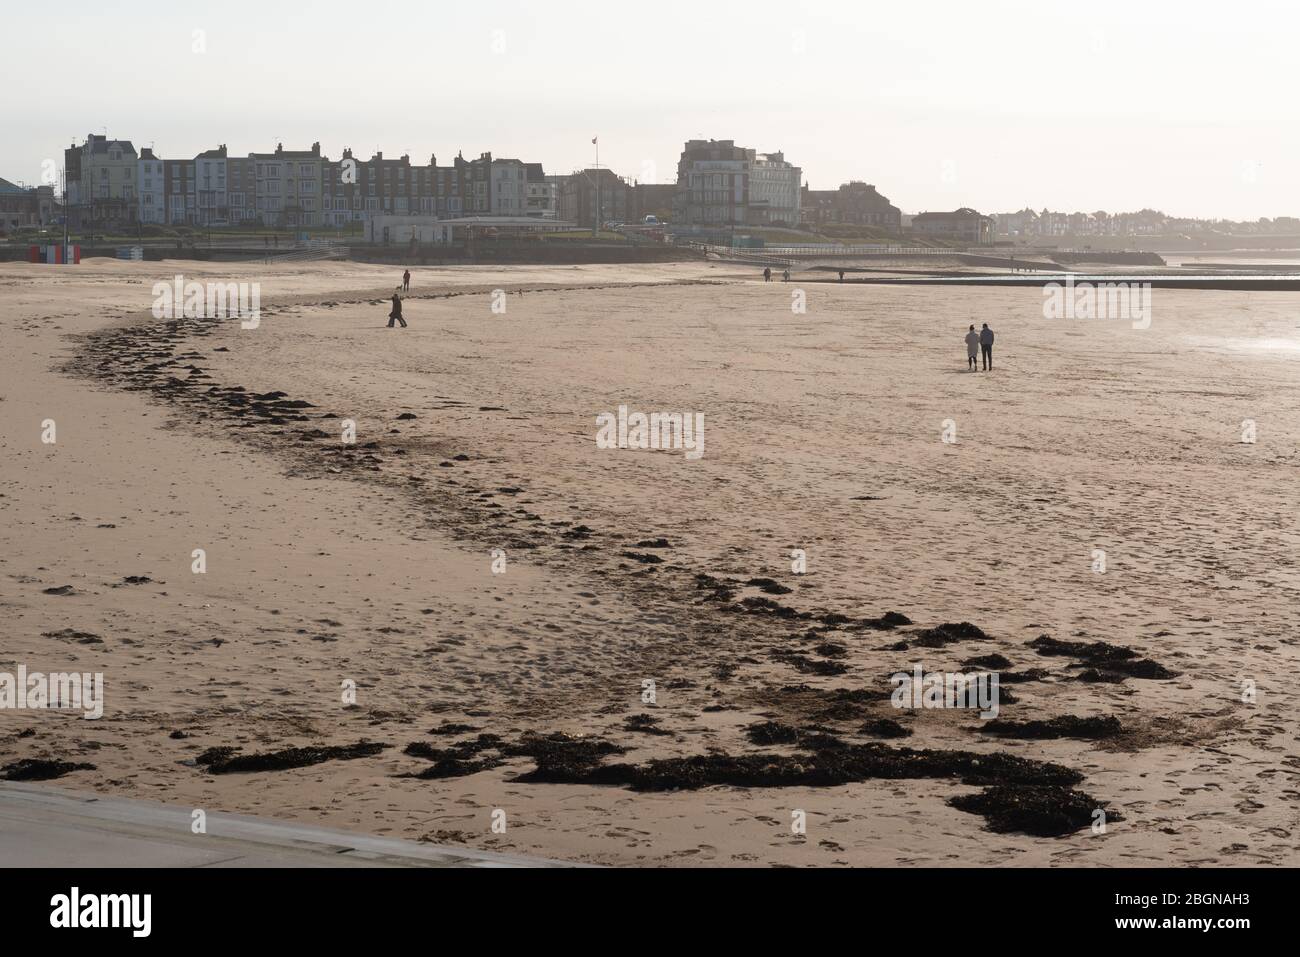 People social distancing while taking daily exercise in lockdown Margate during the Covid-19 global pandemic Stock Photo